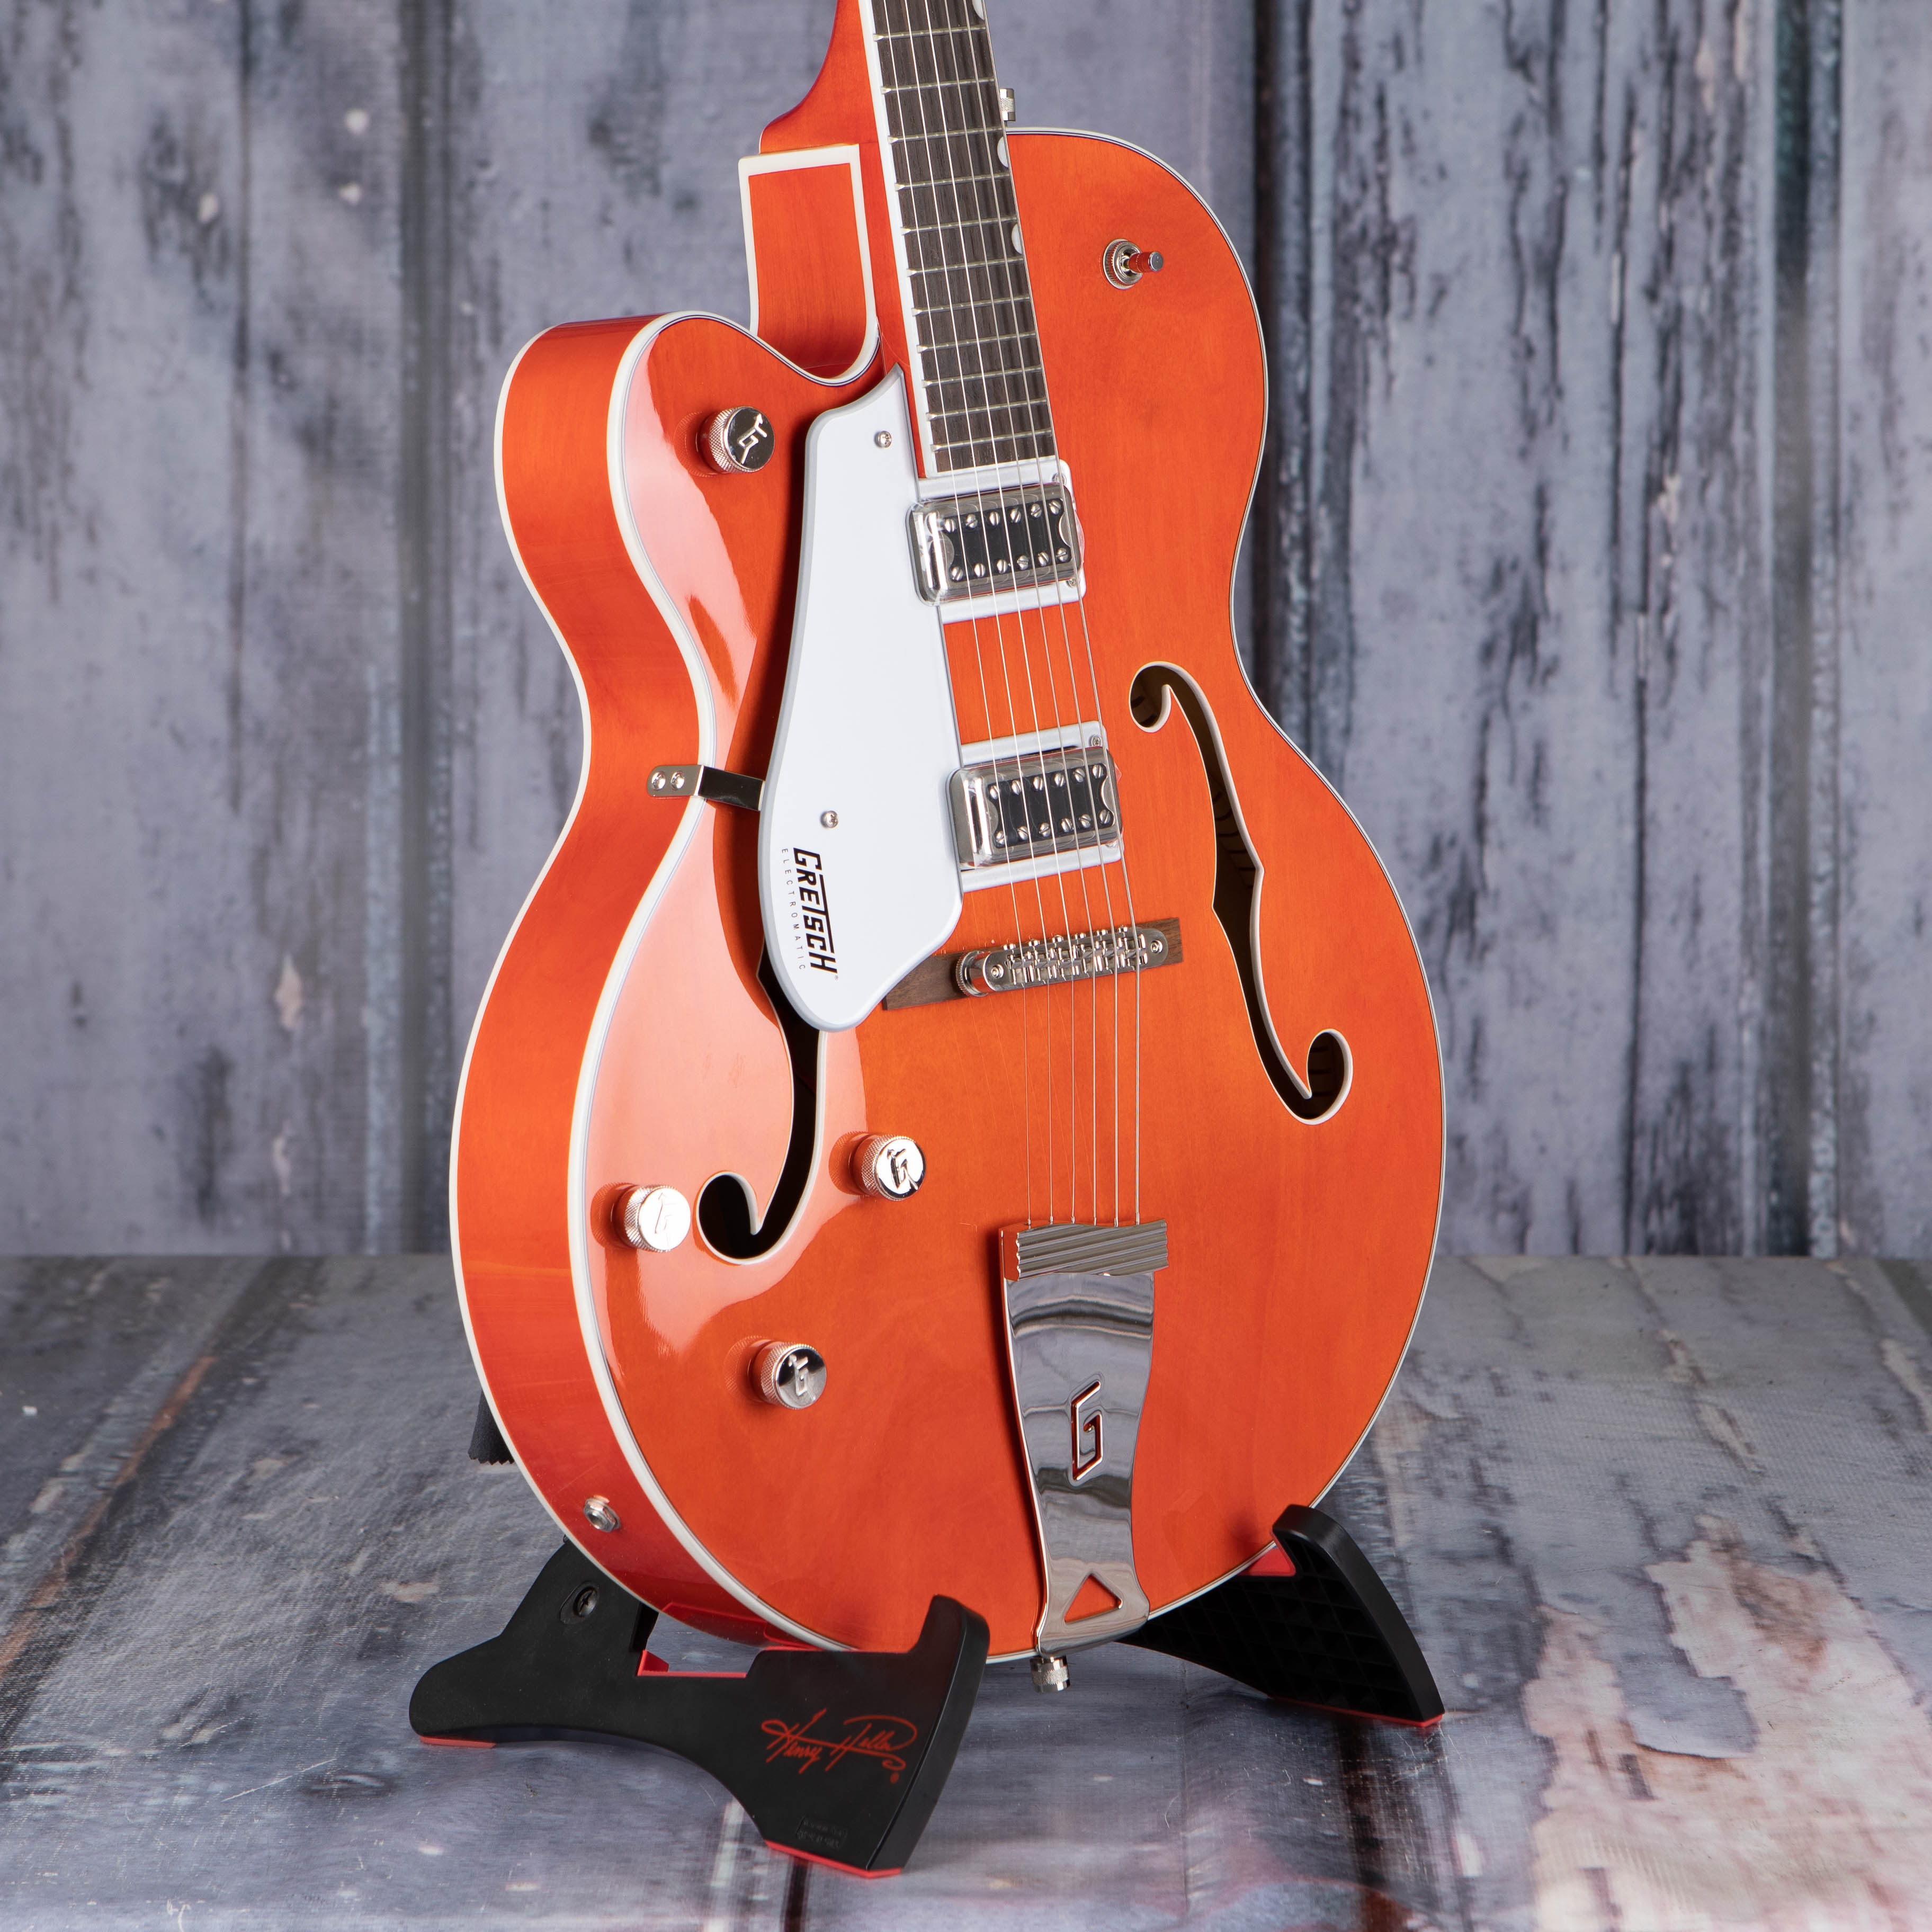 Gretsch G5420LH Electromatic Classic Hollow Body Single-Cut Left-Handed Guitar, Orange Stain, angle